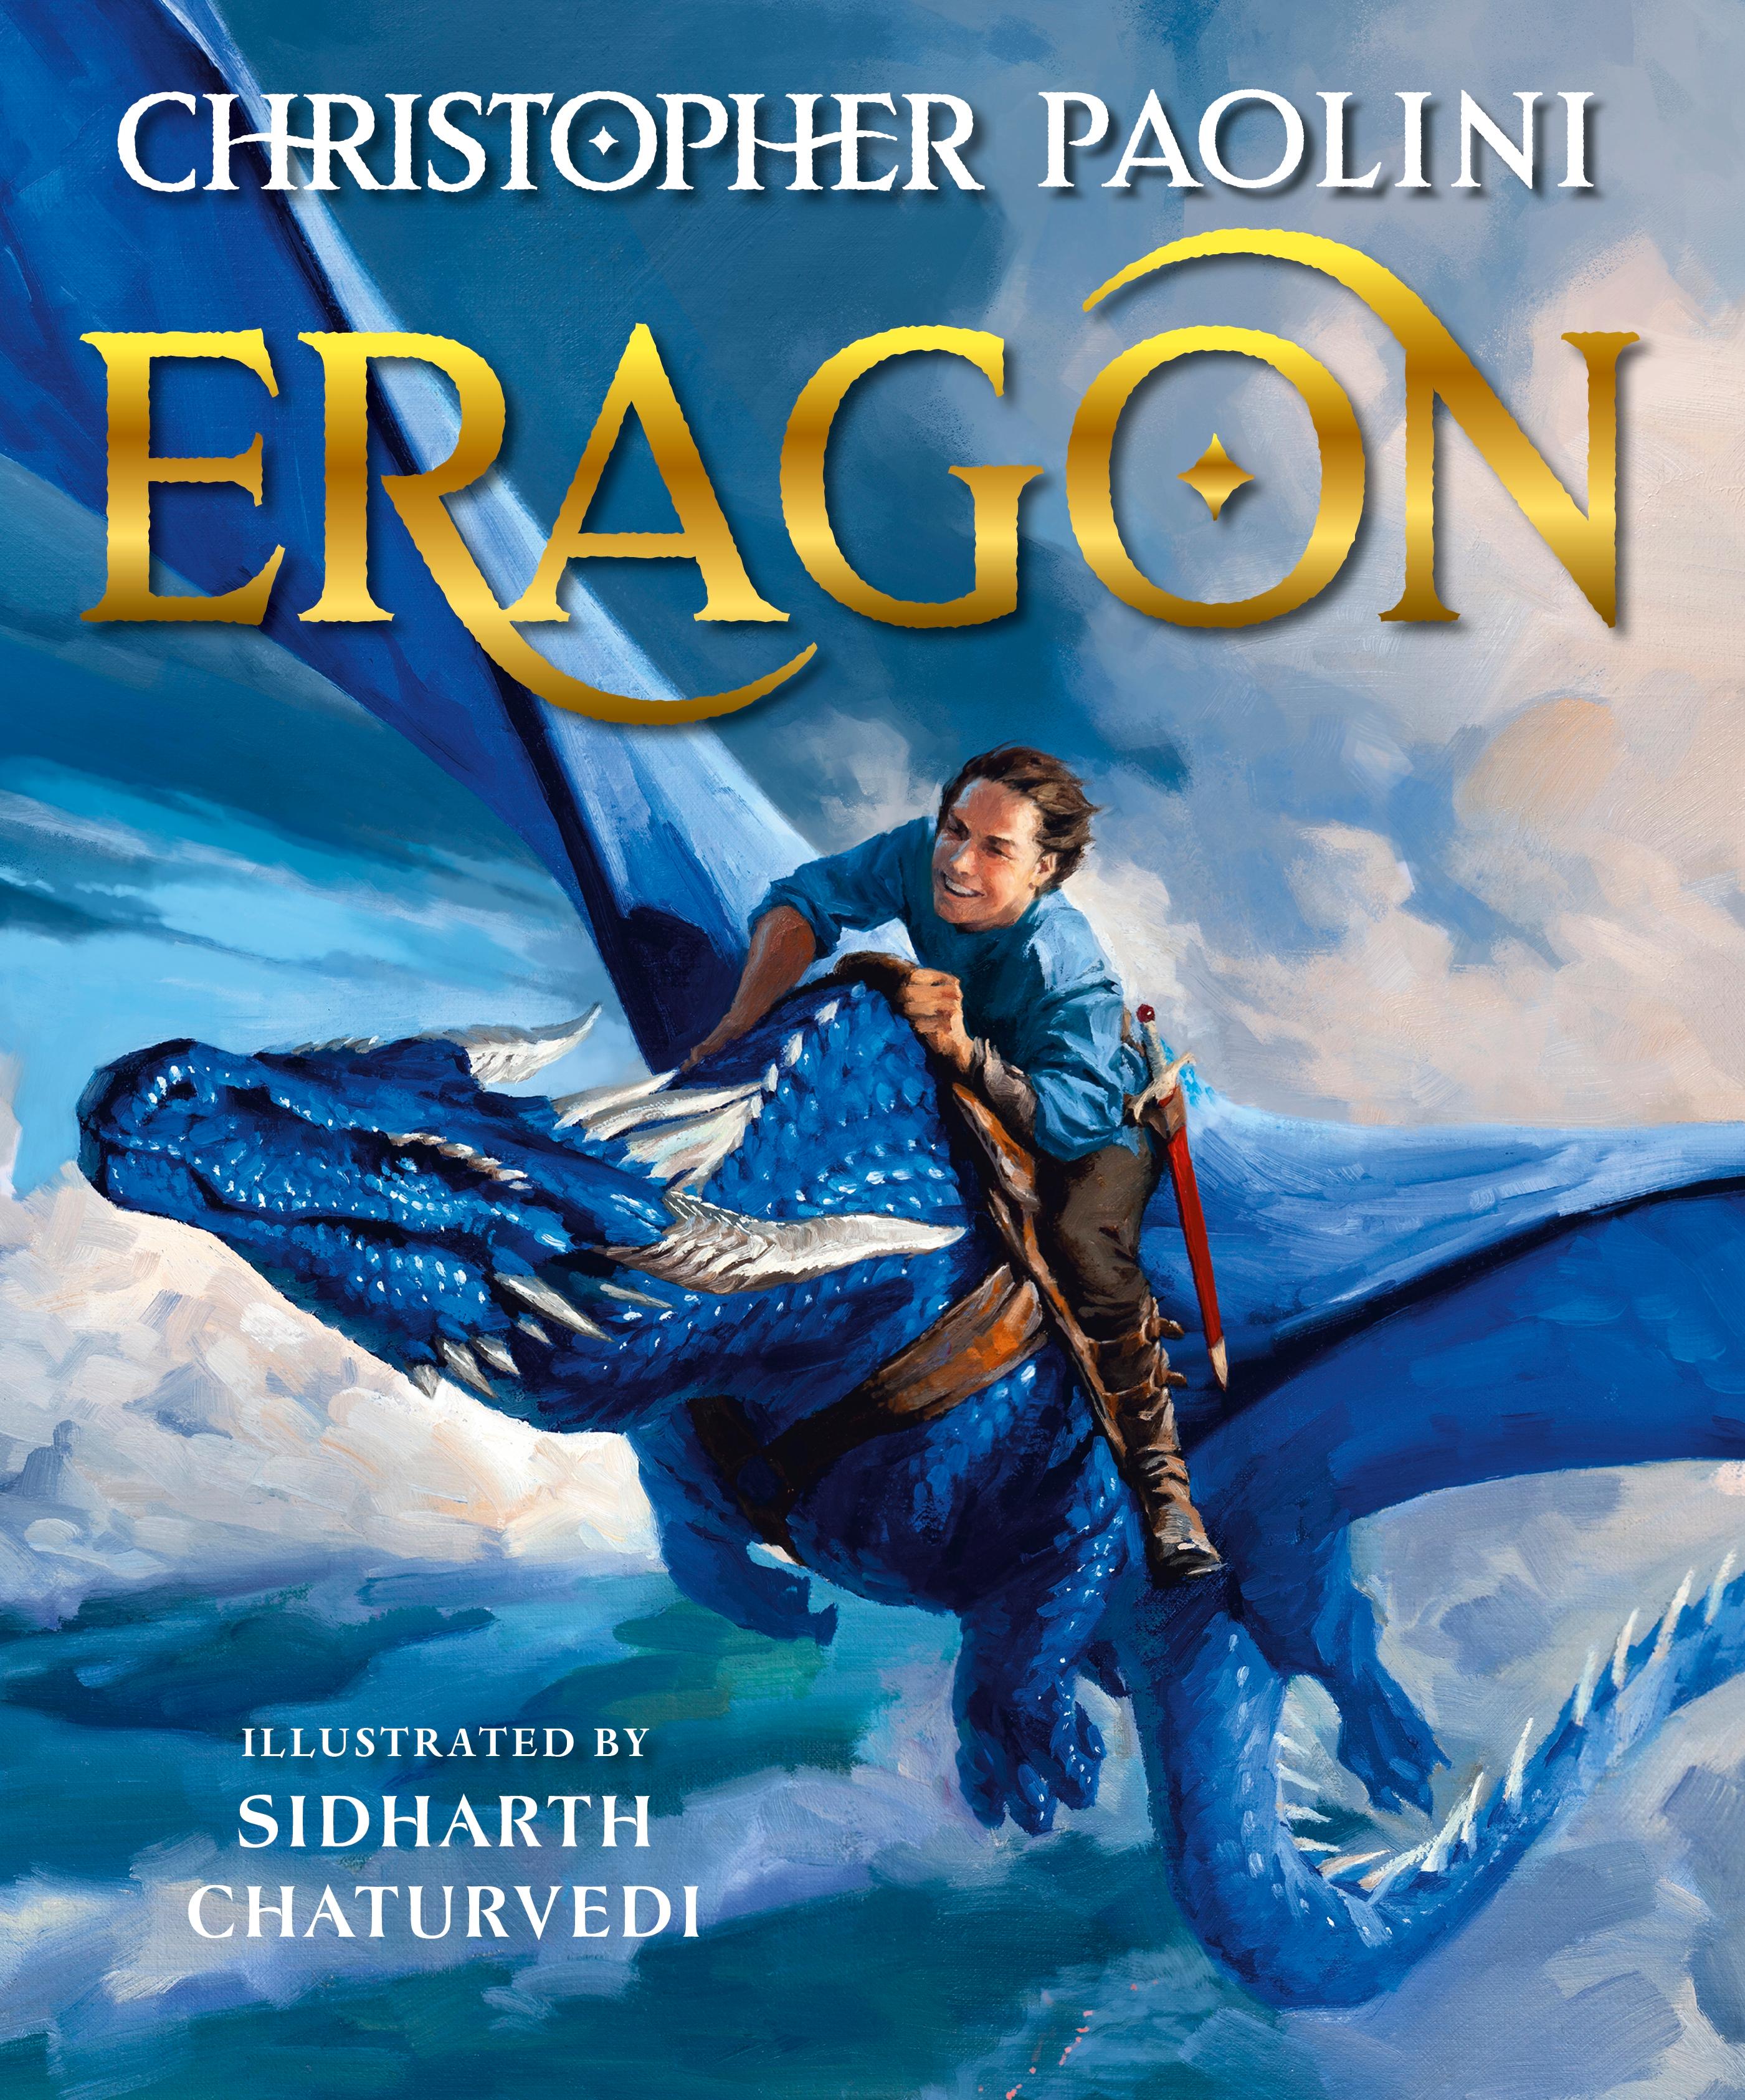 Eragon Book One (Illustrated Edition) / Christopher Paolini / Buch / The Inheritance Cycle / 368 S. / Englisch / 2023 / Penguin Books Ltd (UK) / EAN 9780241681510 - Paolini, Christopher